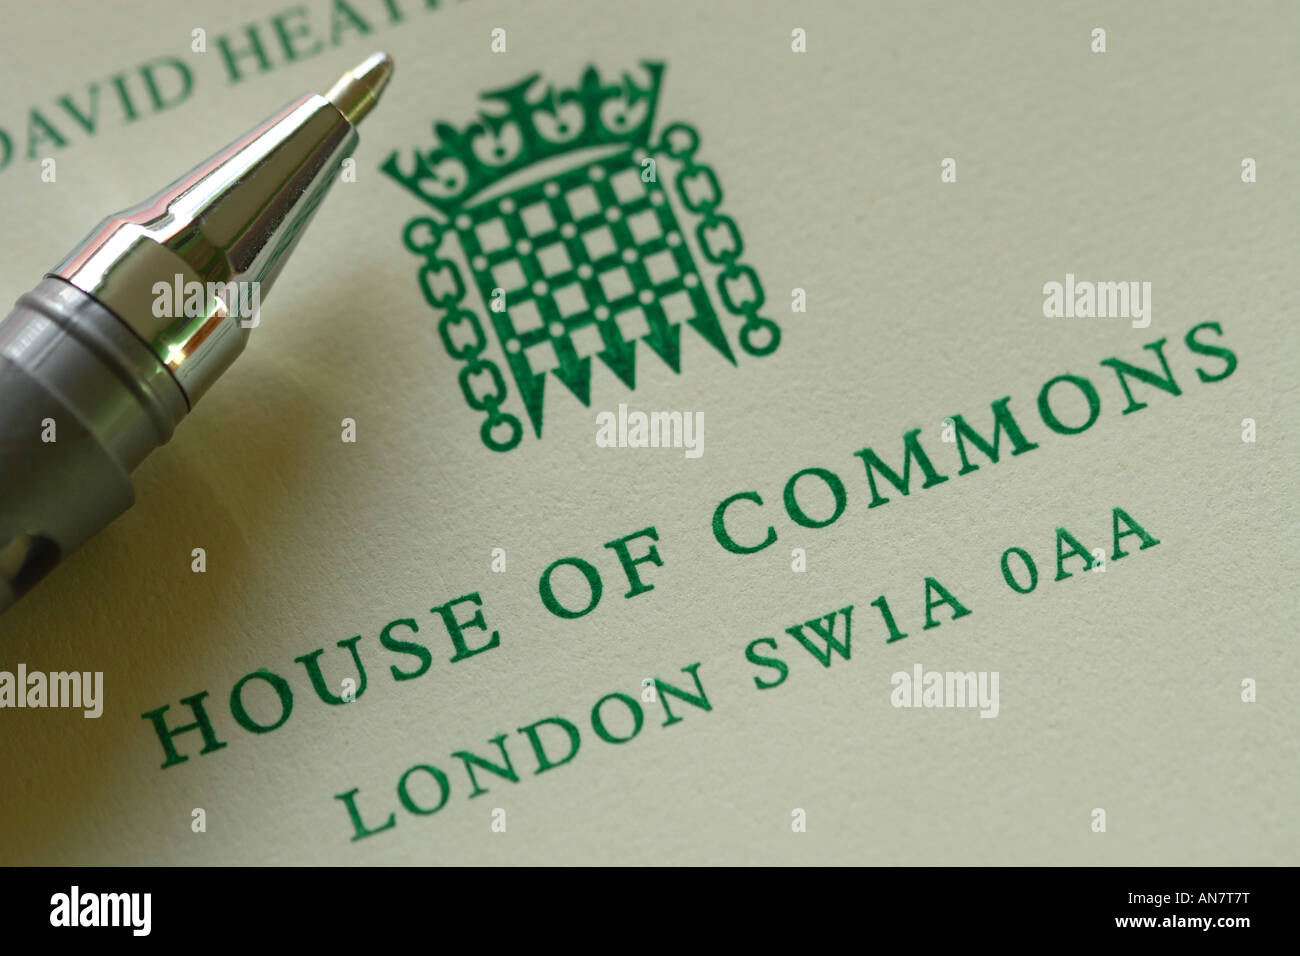 House of Commons parliament letter from an MP Member of Parliament Stock Photo